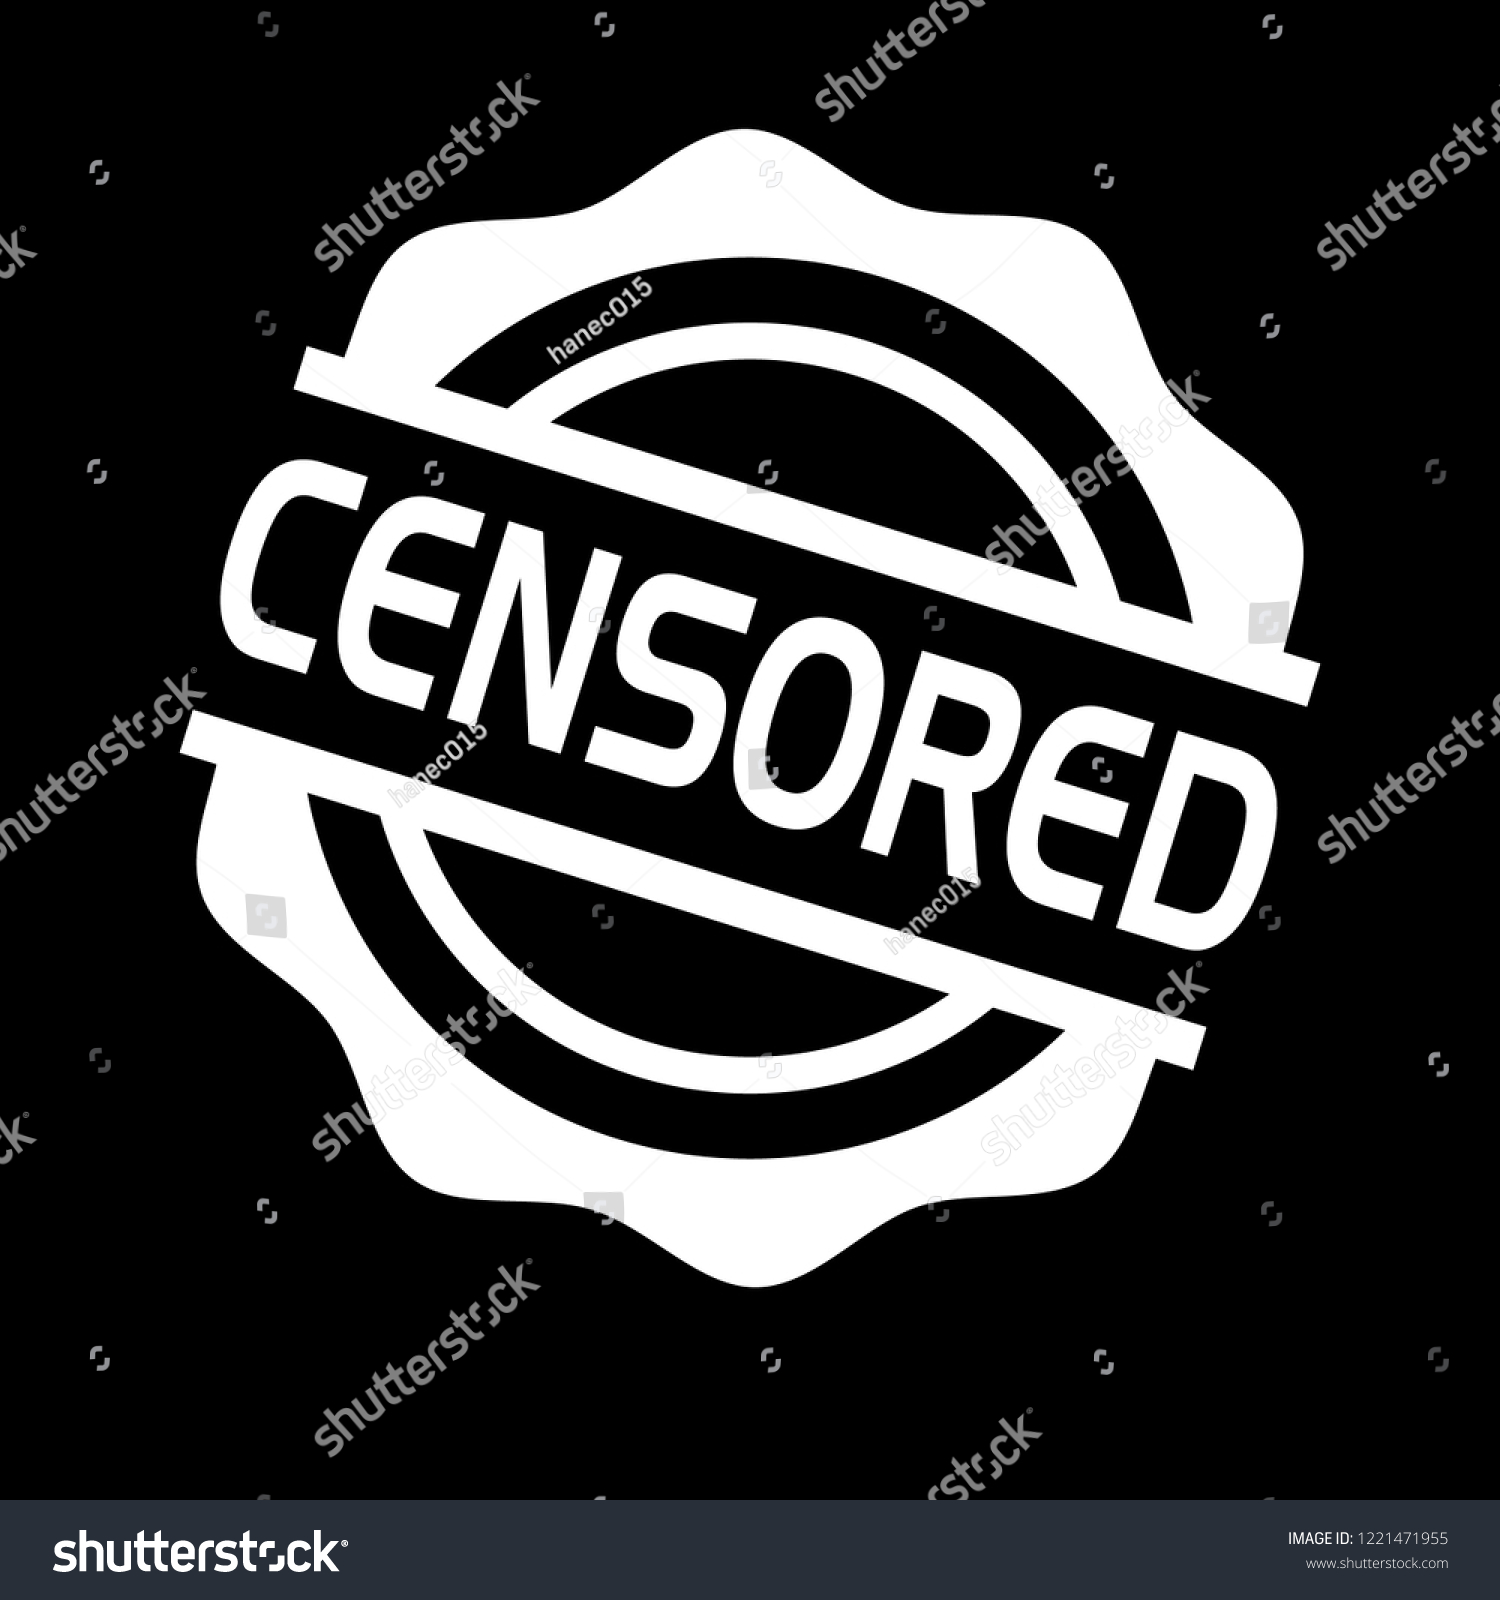 Circle Rubber Stamp Text Censored Censoredrubber Stock Vector Royalty Free